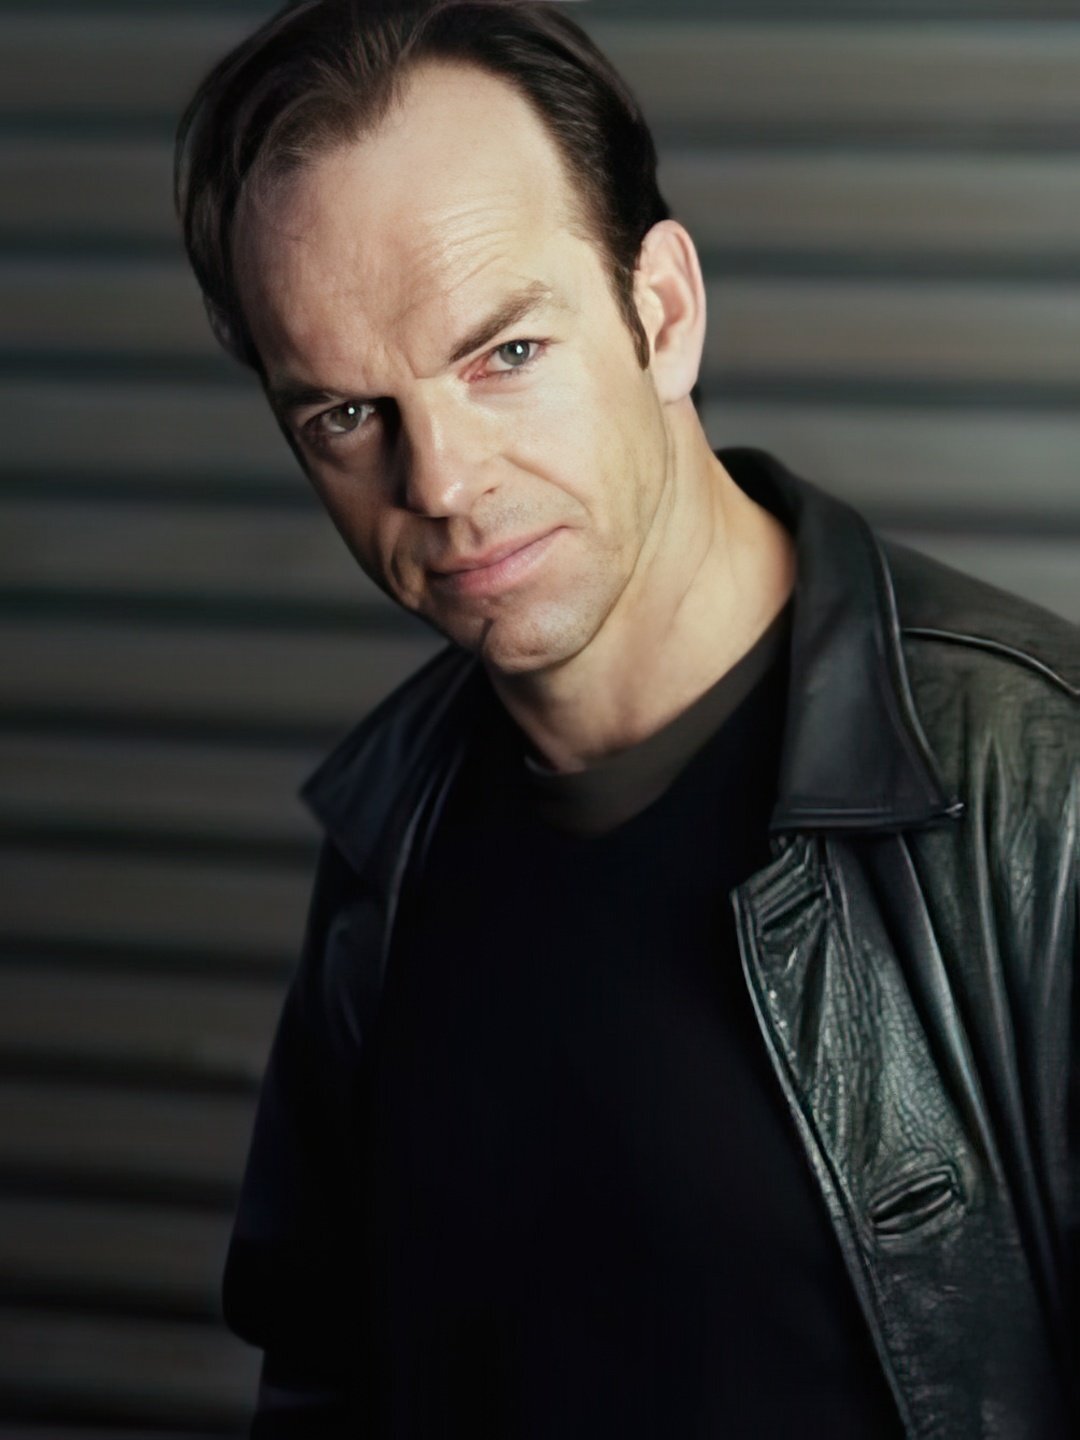 Hugo Weaving how did he became famous